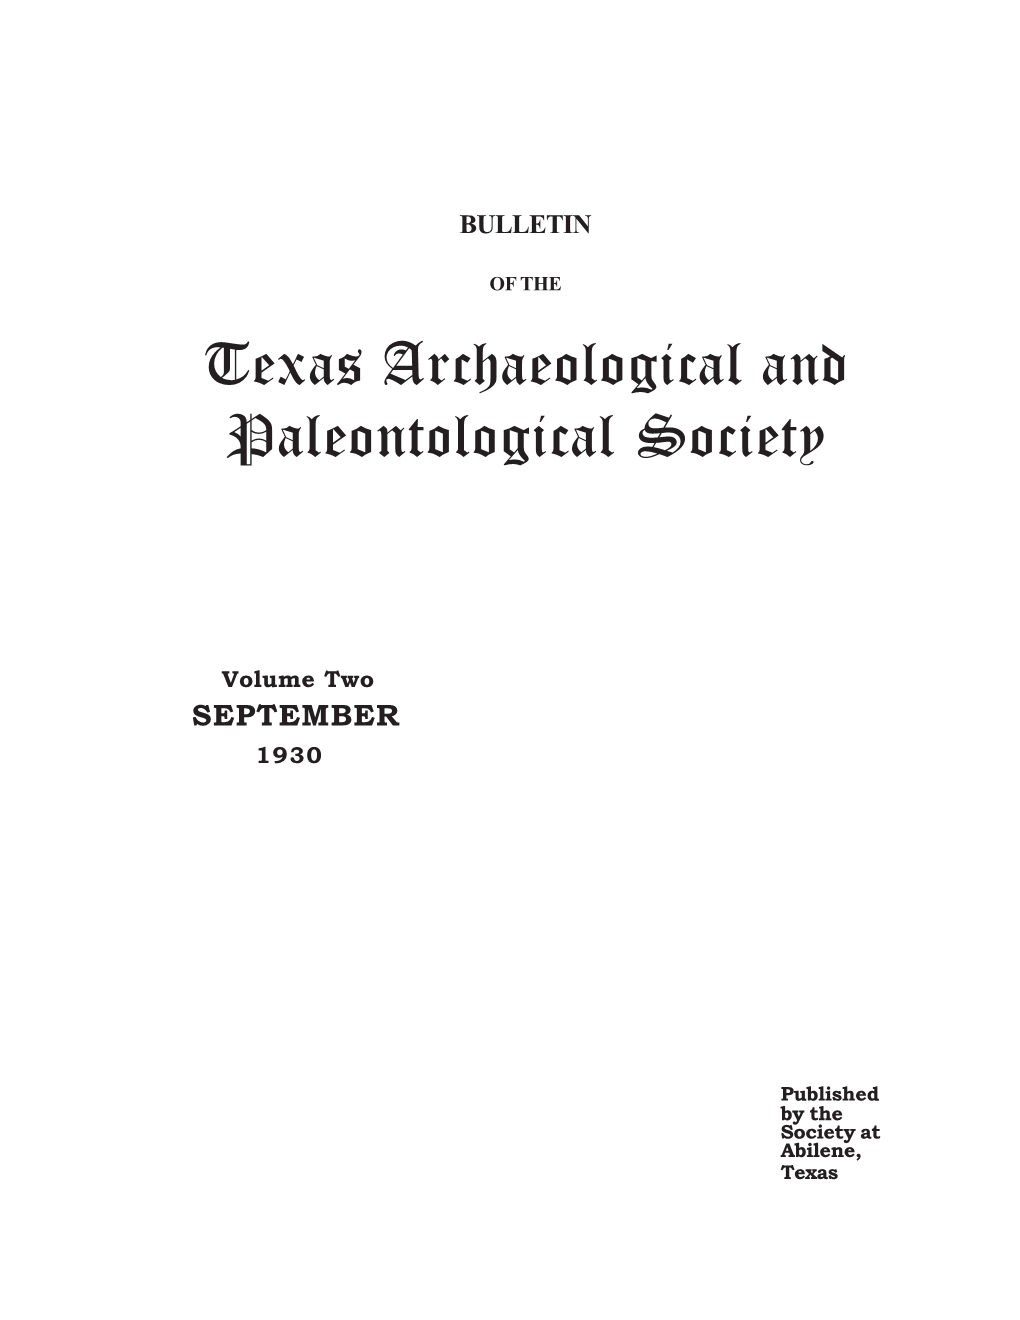 Texas Archaeological and Paleontological Society